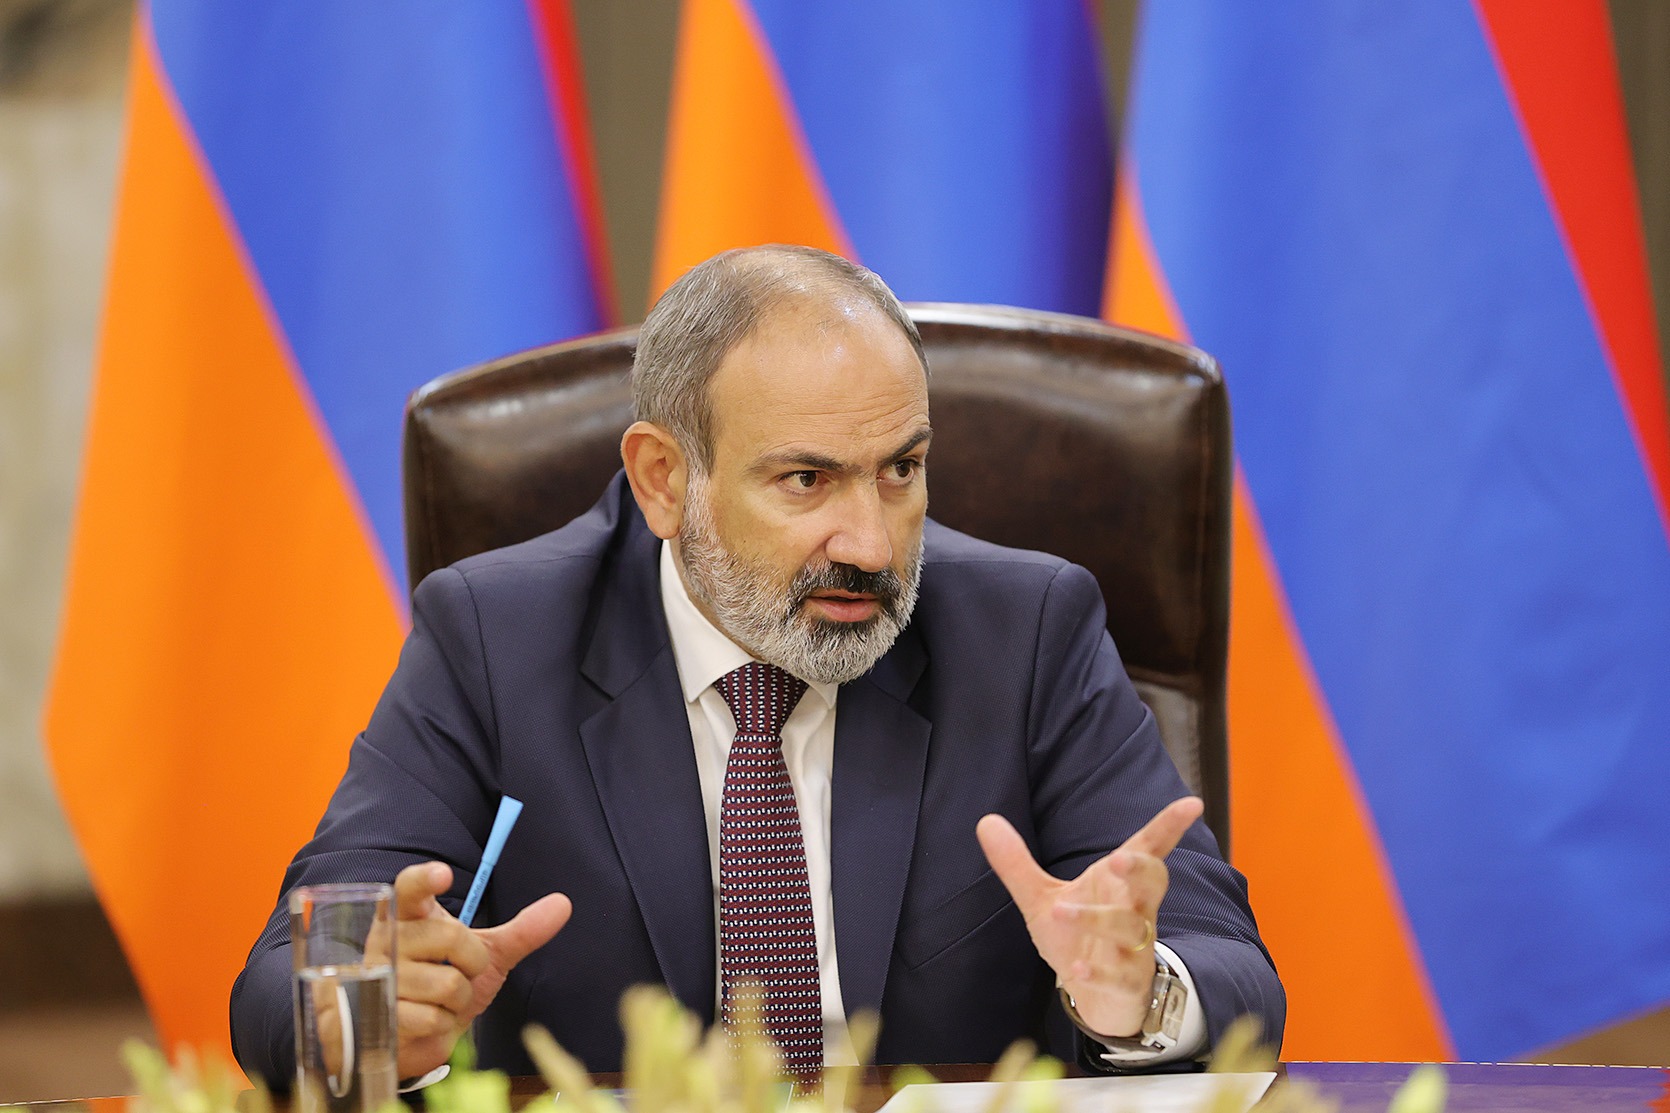 Nikol Pashinyan meets with leaders of extra-parliamentary political forces